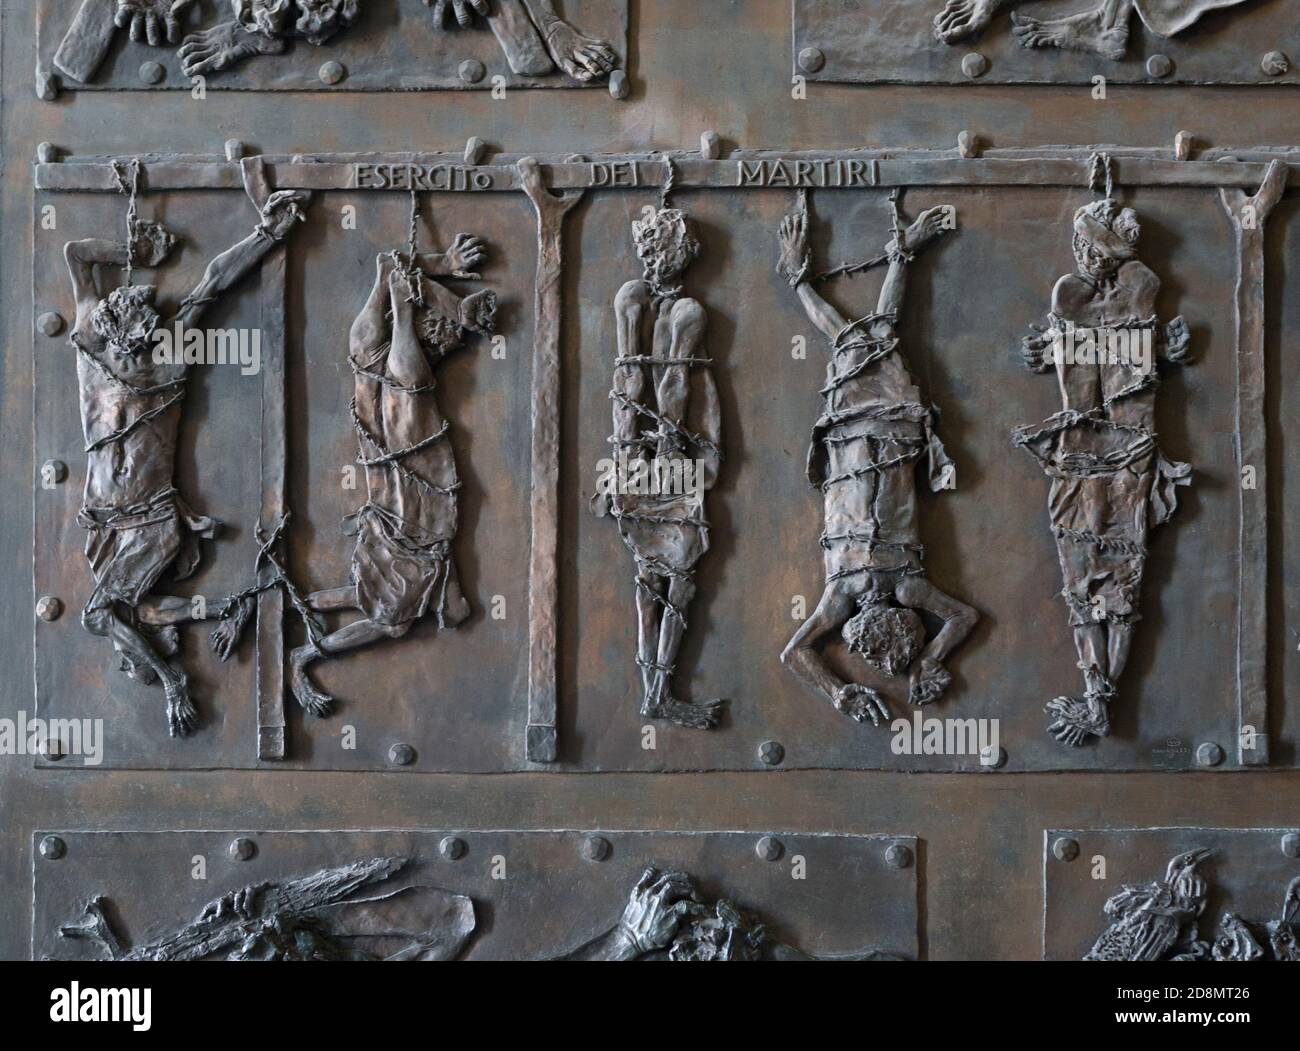 Door Detail of St Peters Basillica, the Vatican, Rome, Italy. The bronze sculpture depicts Christian Martyrs. Stock Photo